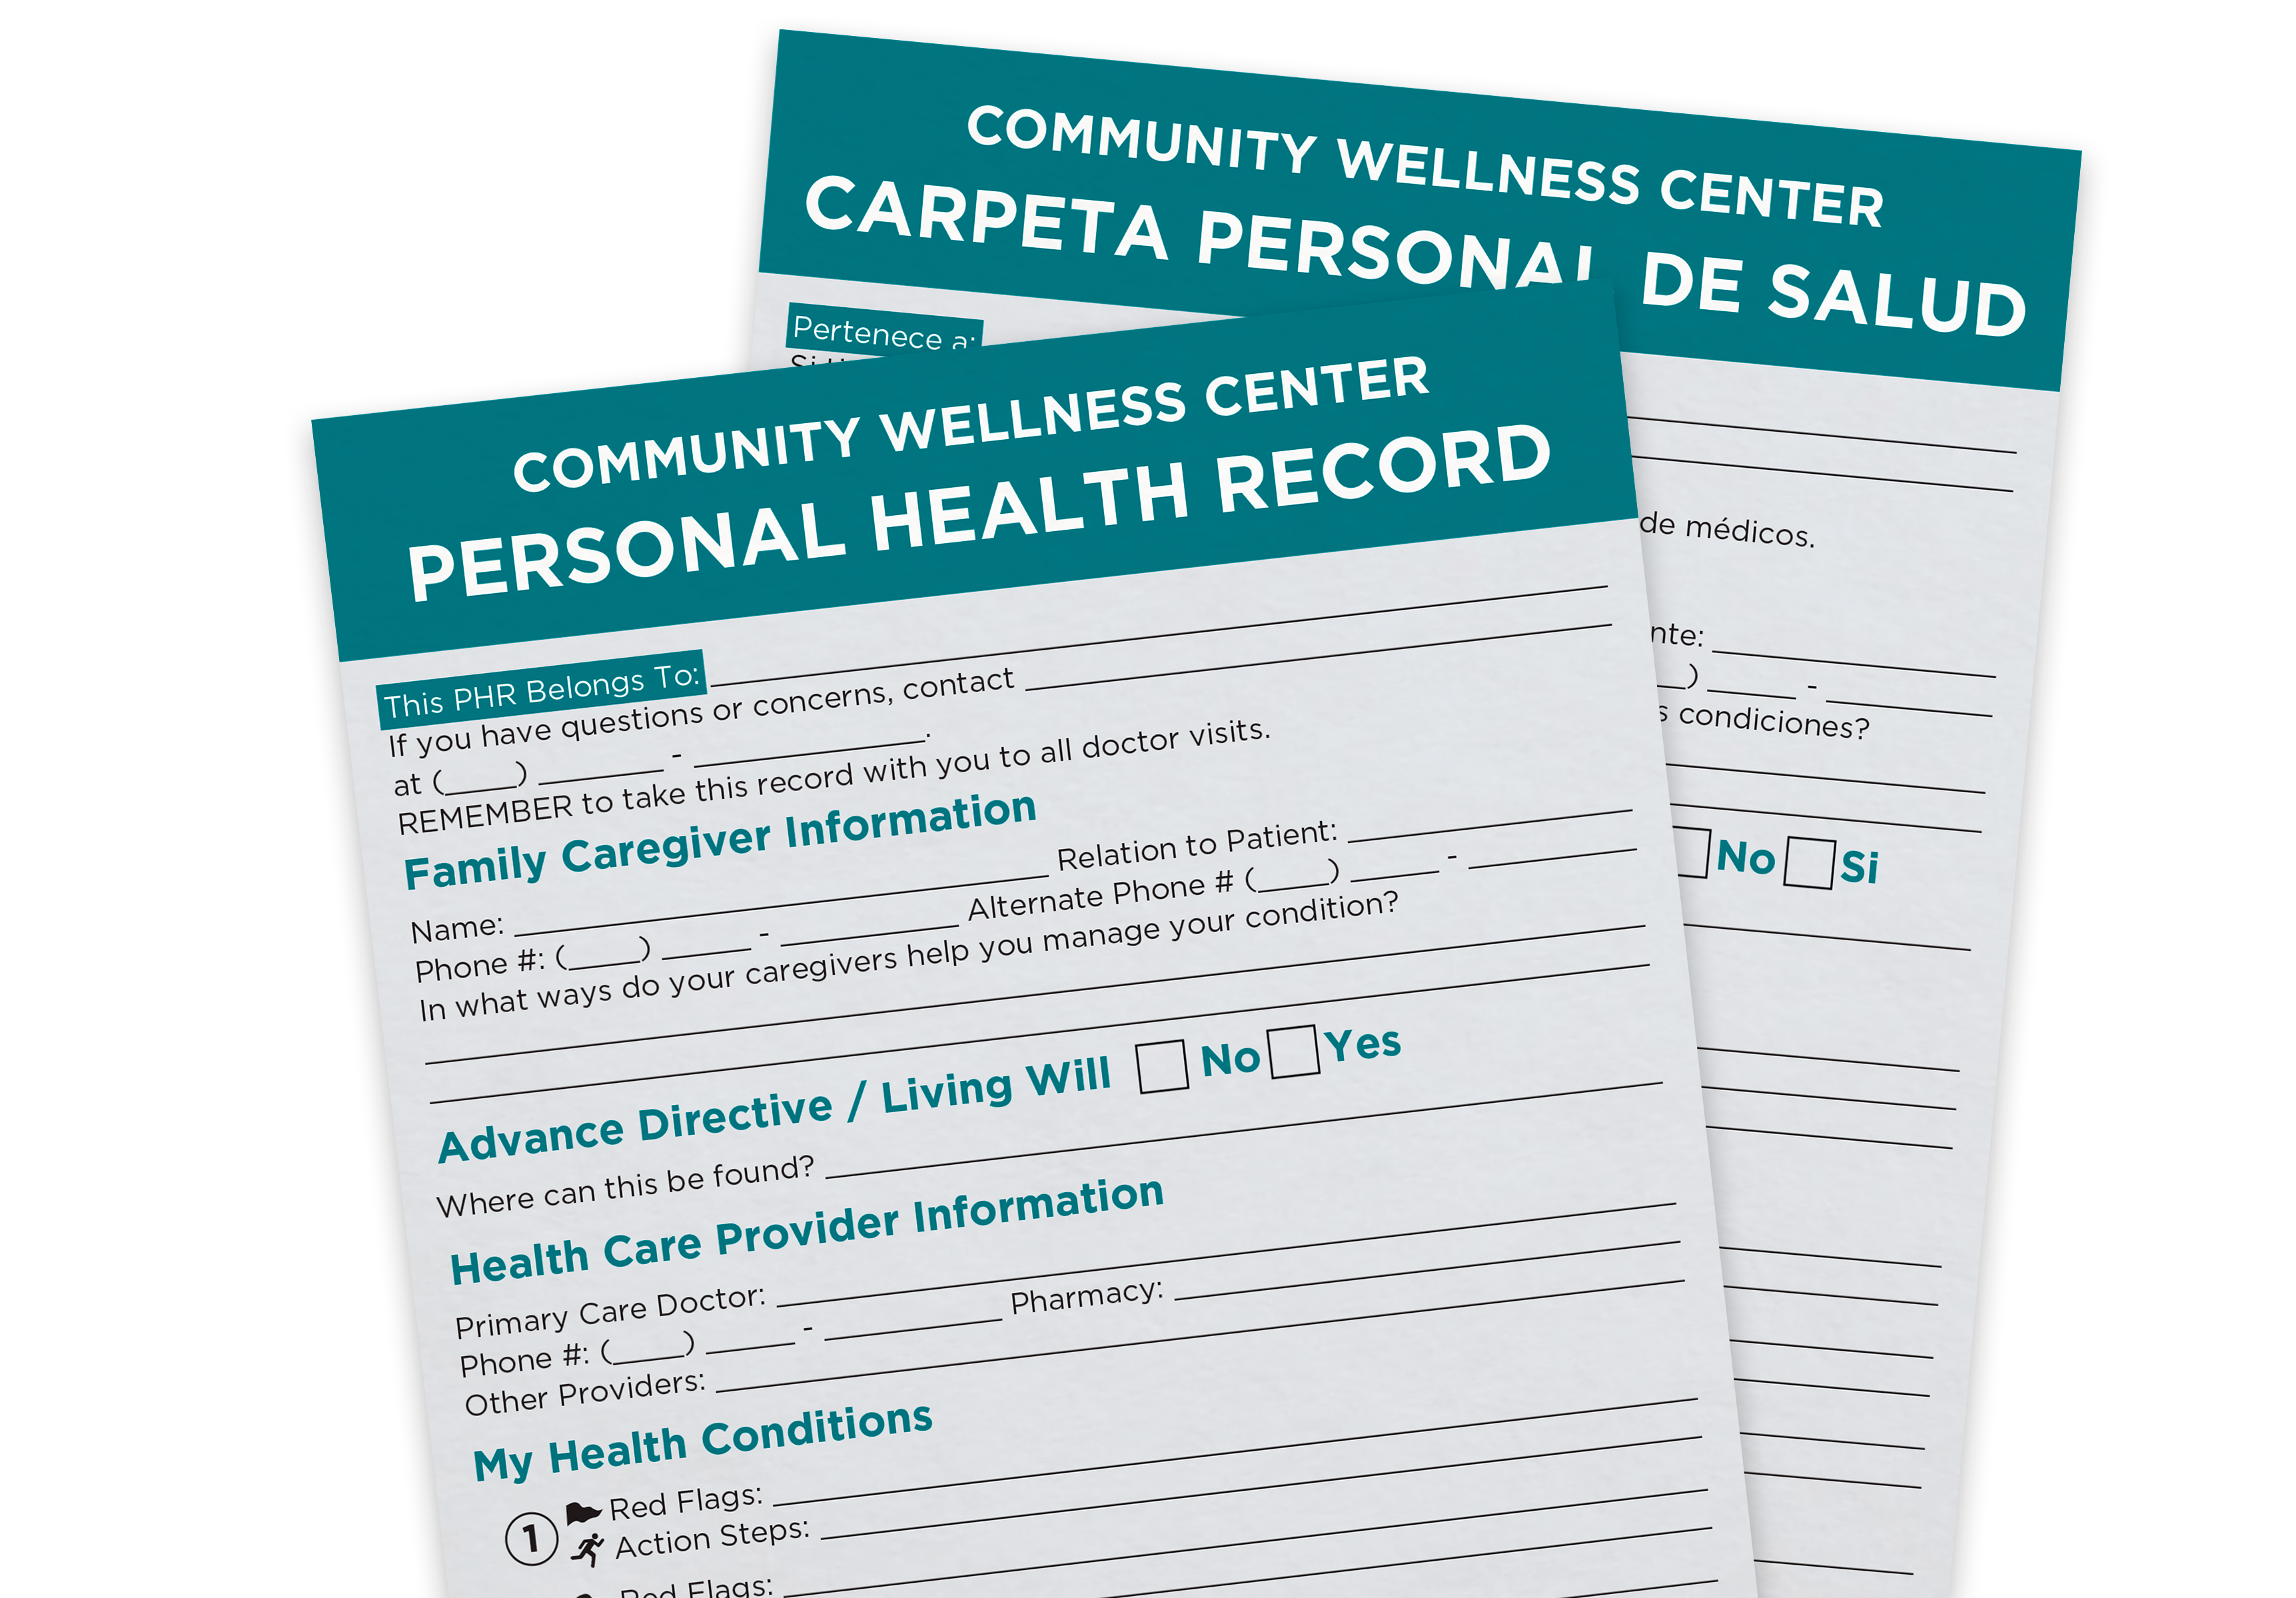 Image of Personal Health Record document in English and Spanish